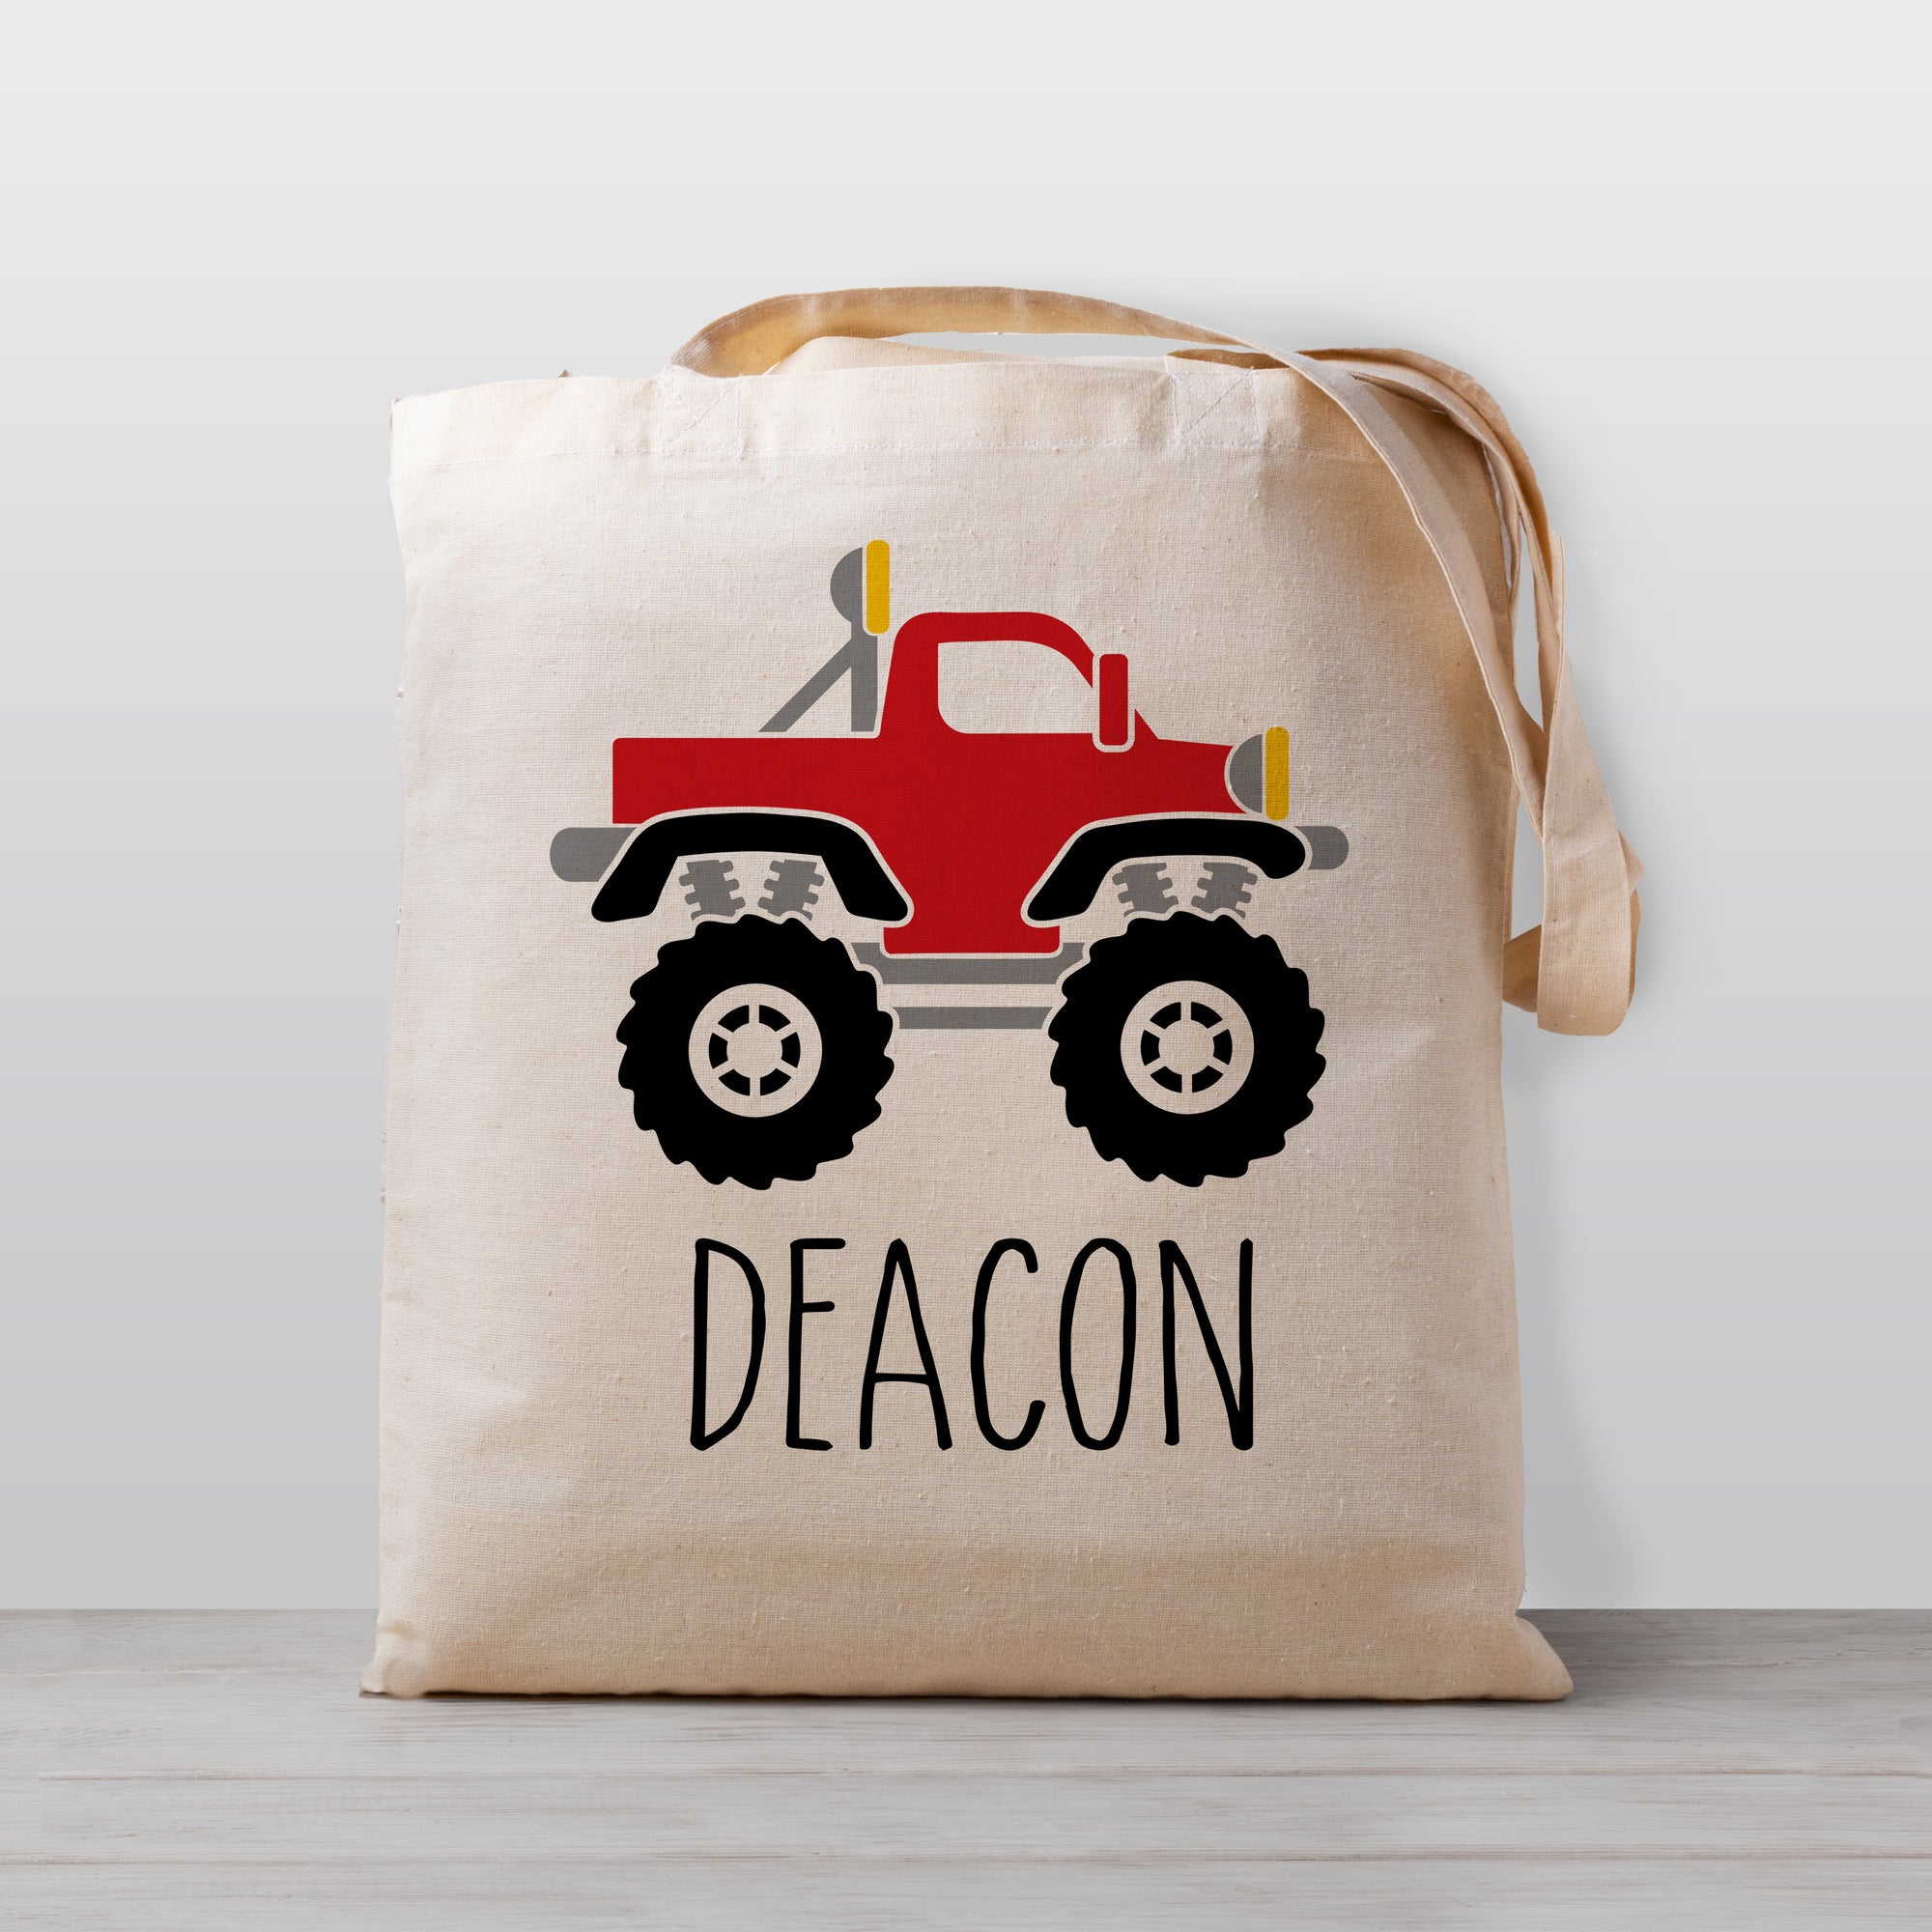 Personalized monster truck tote bag, lightweight and easy for kids to carry, 100% natural cotton canvas